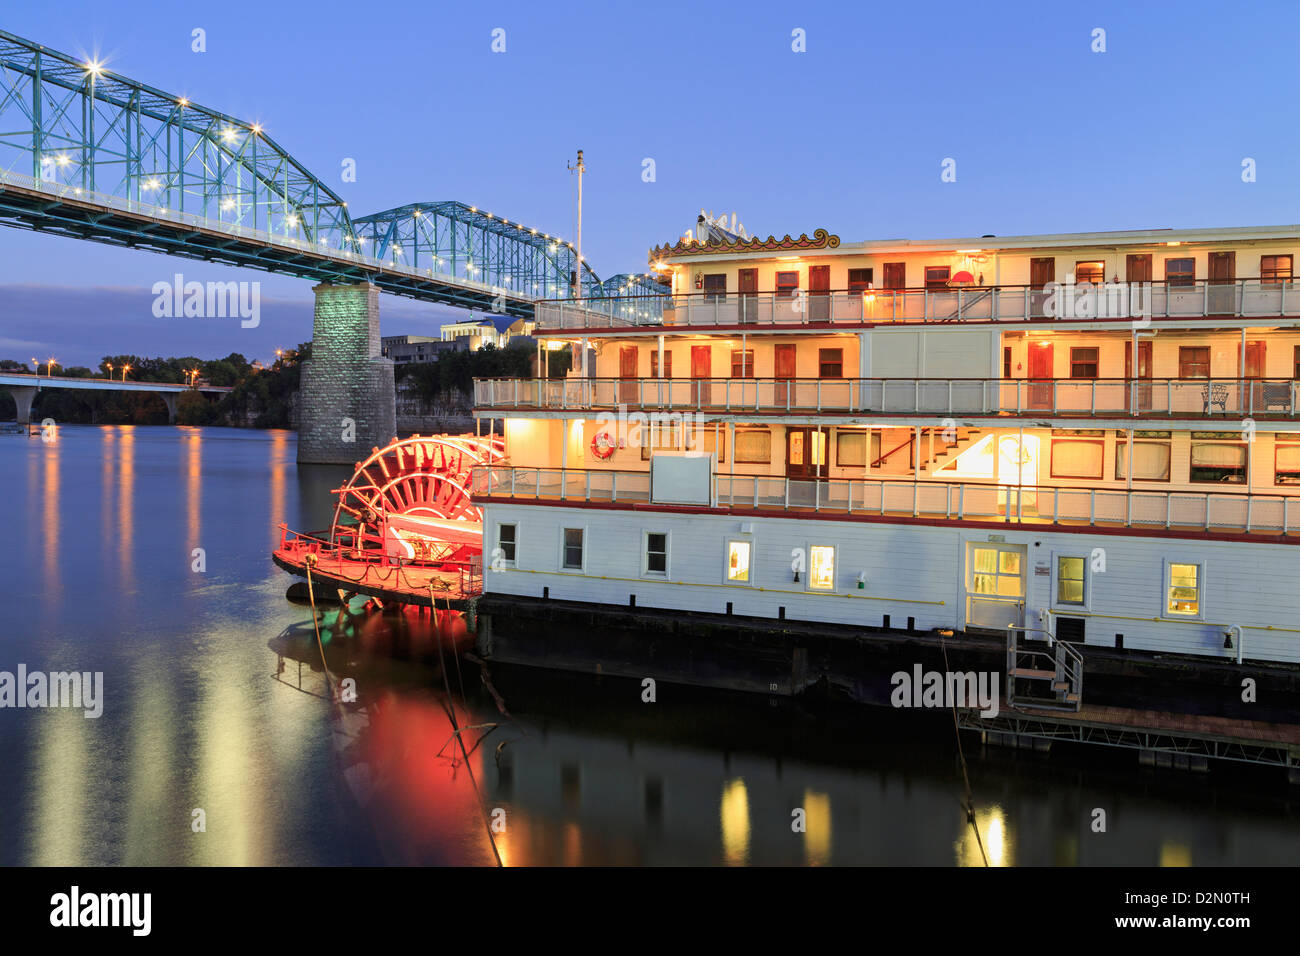 https://c8.alamy.com/comp/D2N0TH/delta-queen-riverboat-and-walnut-street-bridge-chattanooga-tennessee-D2N0TH.jpg